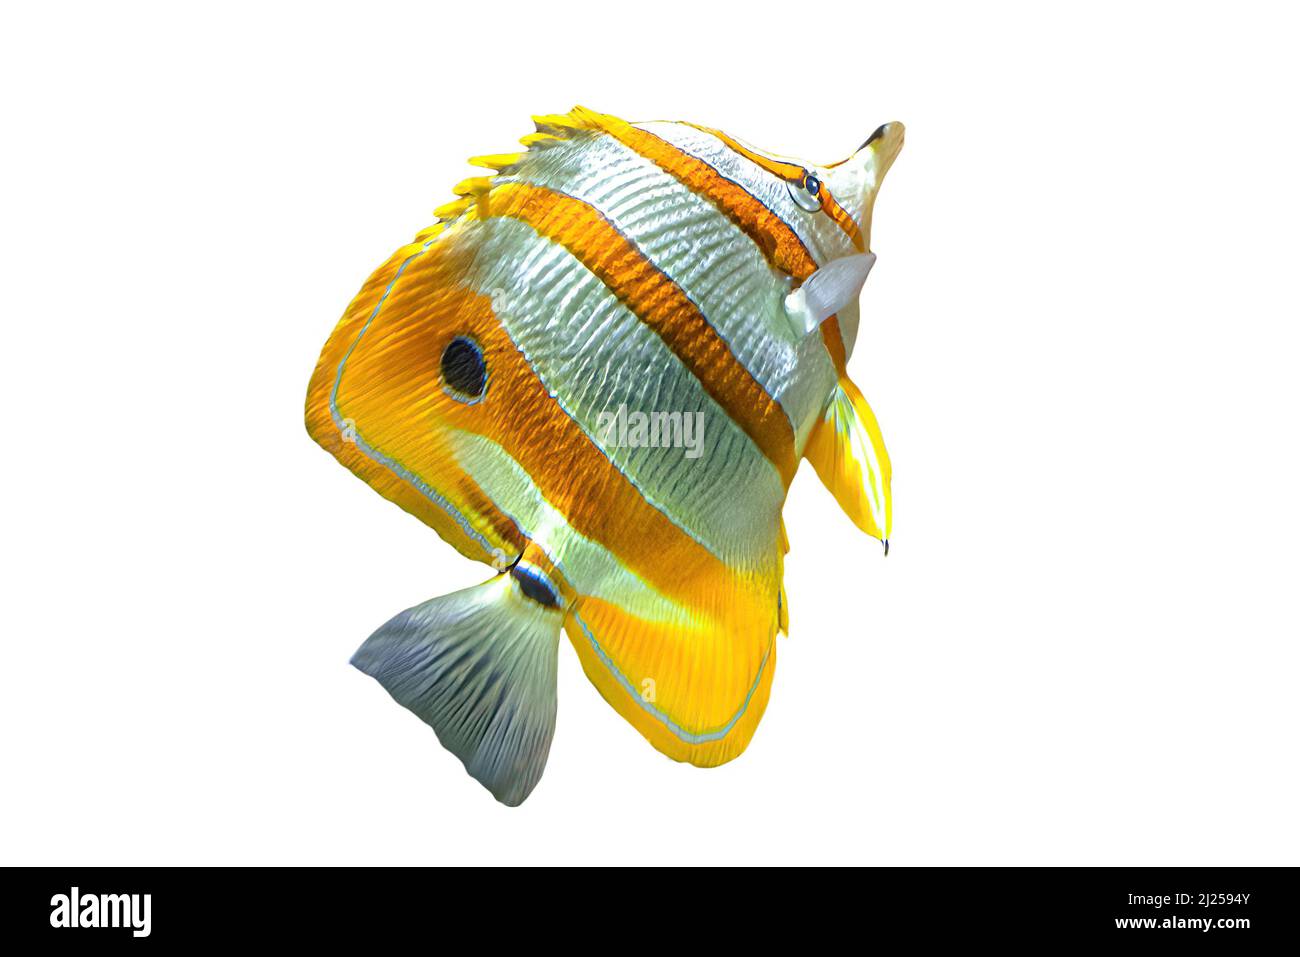 Copperband butterflyfish or beaked coral fish isolated on white. Chelmon rostratus species of butterflyfish belonging to family Chaetodontidae. Living Stock Photo